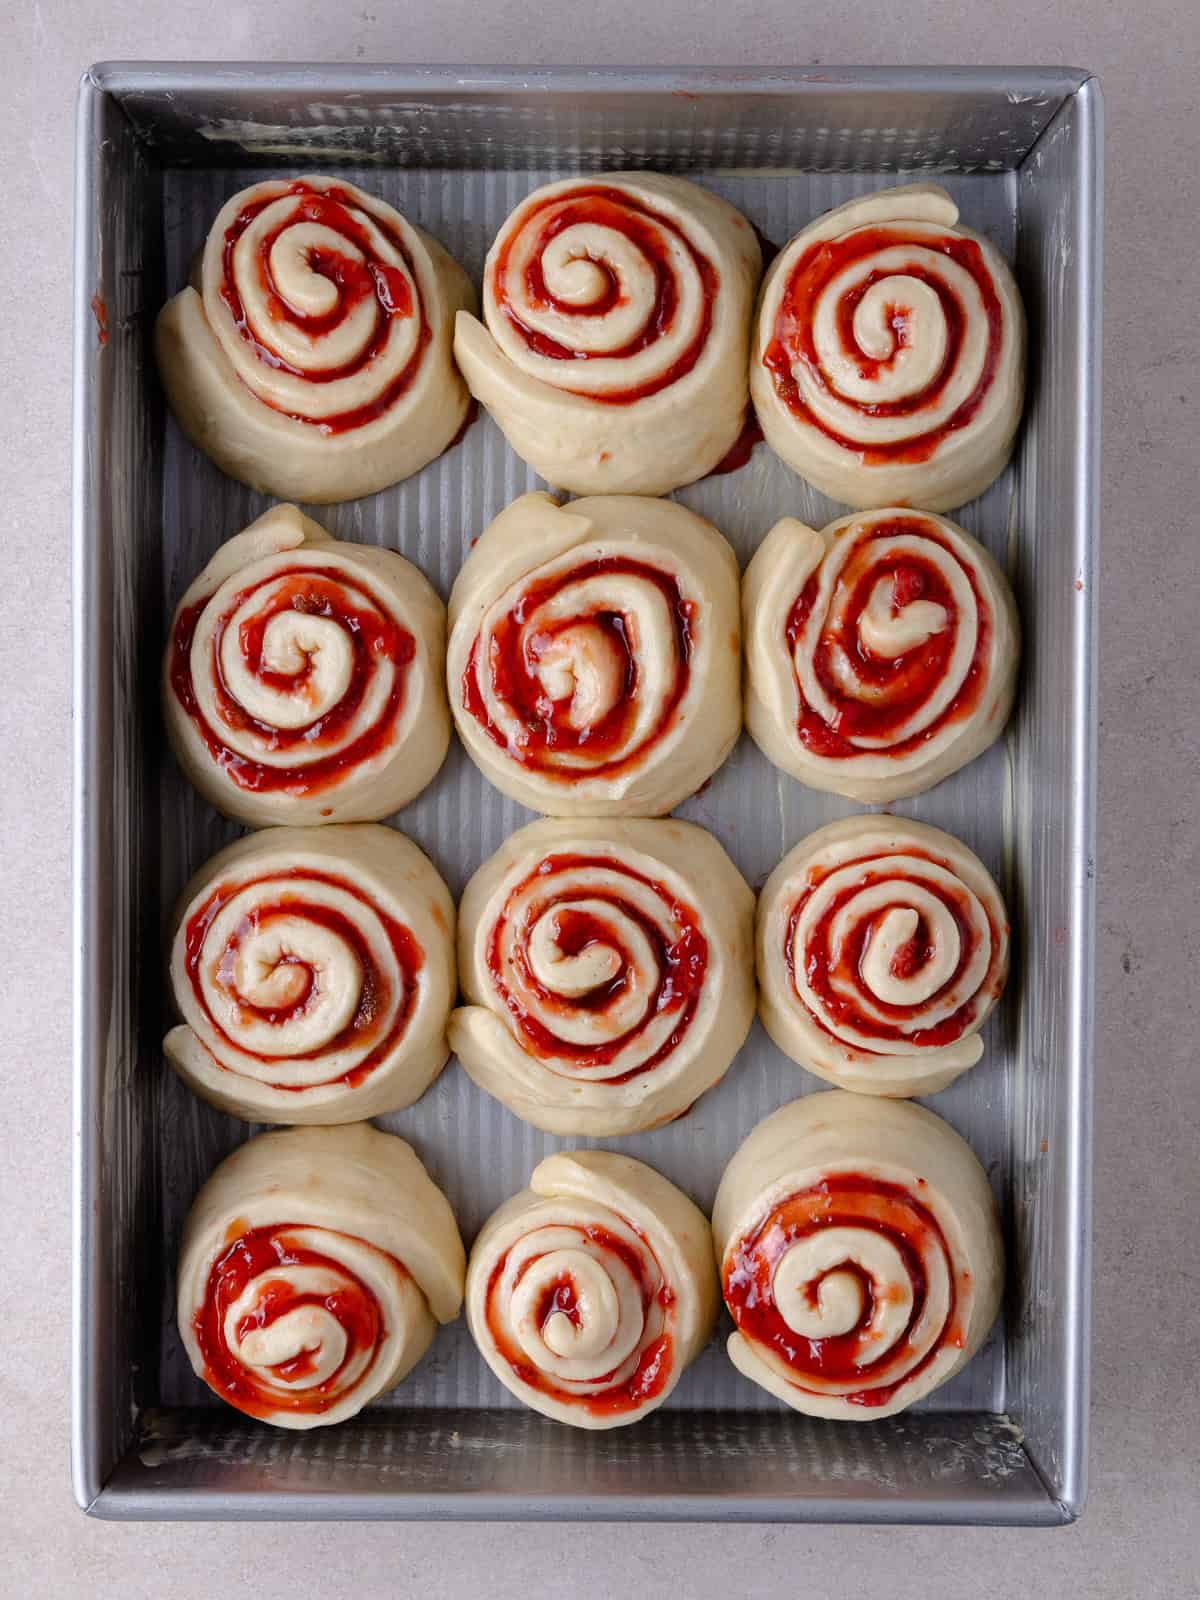 Strawberry rolls are placed in large buttered baking tray. Rolls will need to proof for about 30 to 45 minutes.